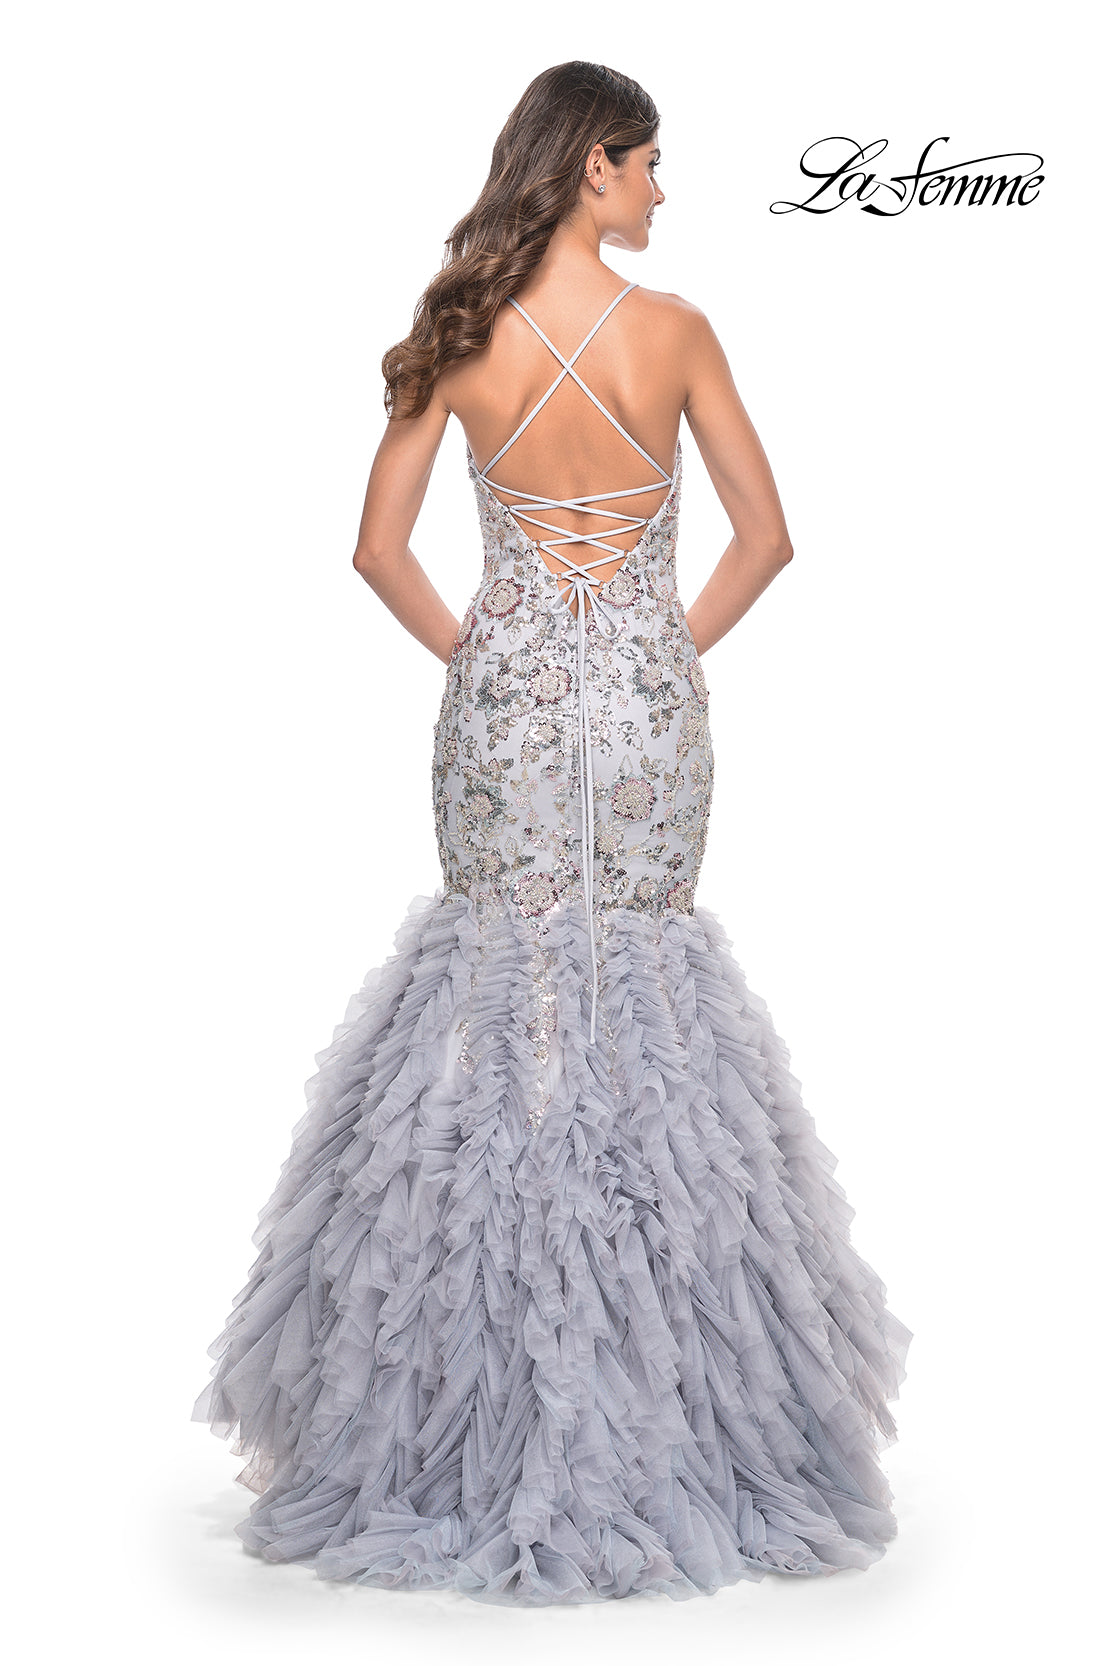 La-Femme-32105-V-Neck-Neckline-Lace-up-Back-Beaded-Ruffle-Tulle-Mermaid-Fitted-Trumpet-Silver-Evening-Dress-B-Chic-Fashions-Prom-Dress